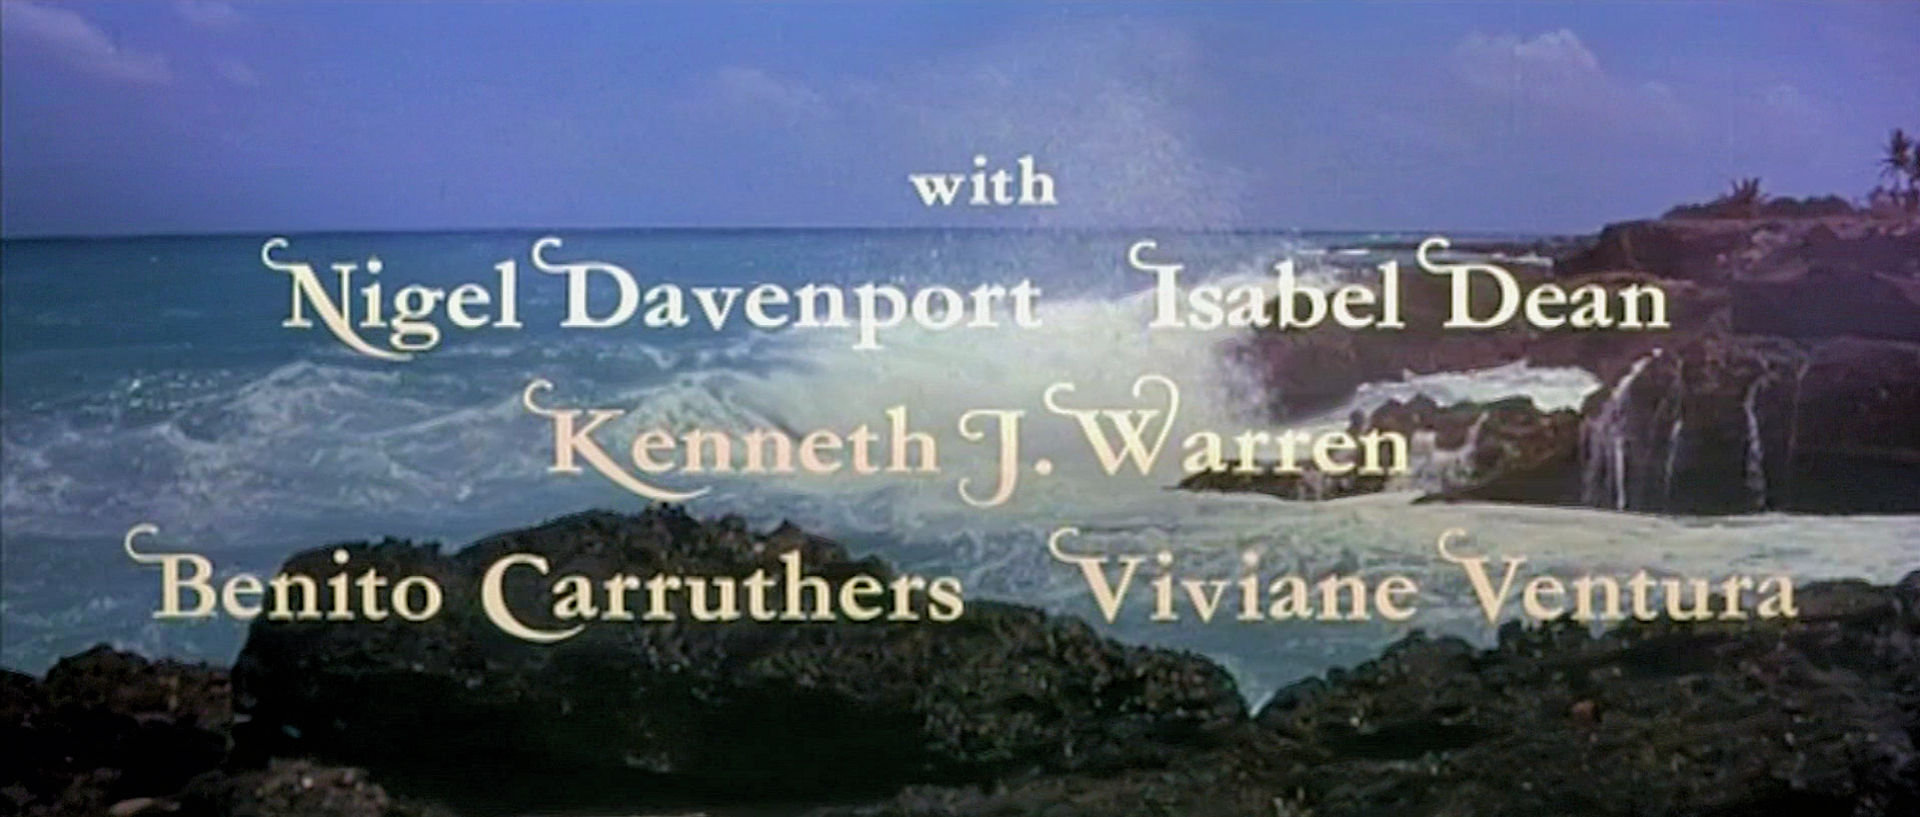 Main title from A High Wind in Jamaica (1965) (6). With Nigel Davenport, Isabel Dean, Kenneth J Warren, Benito Carruthers, Viviane Ventura